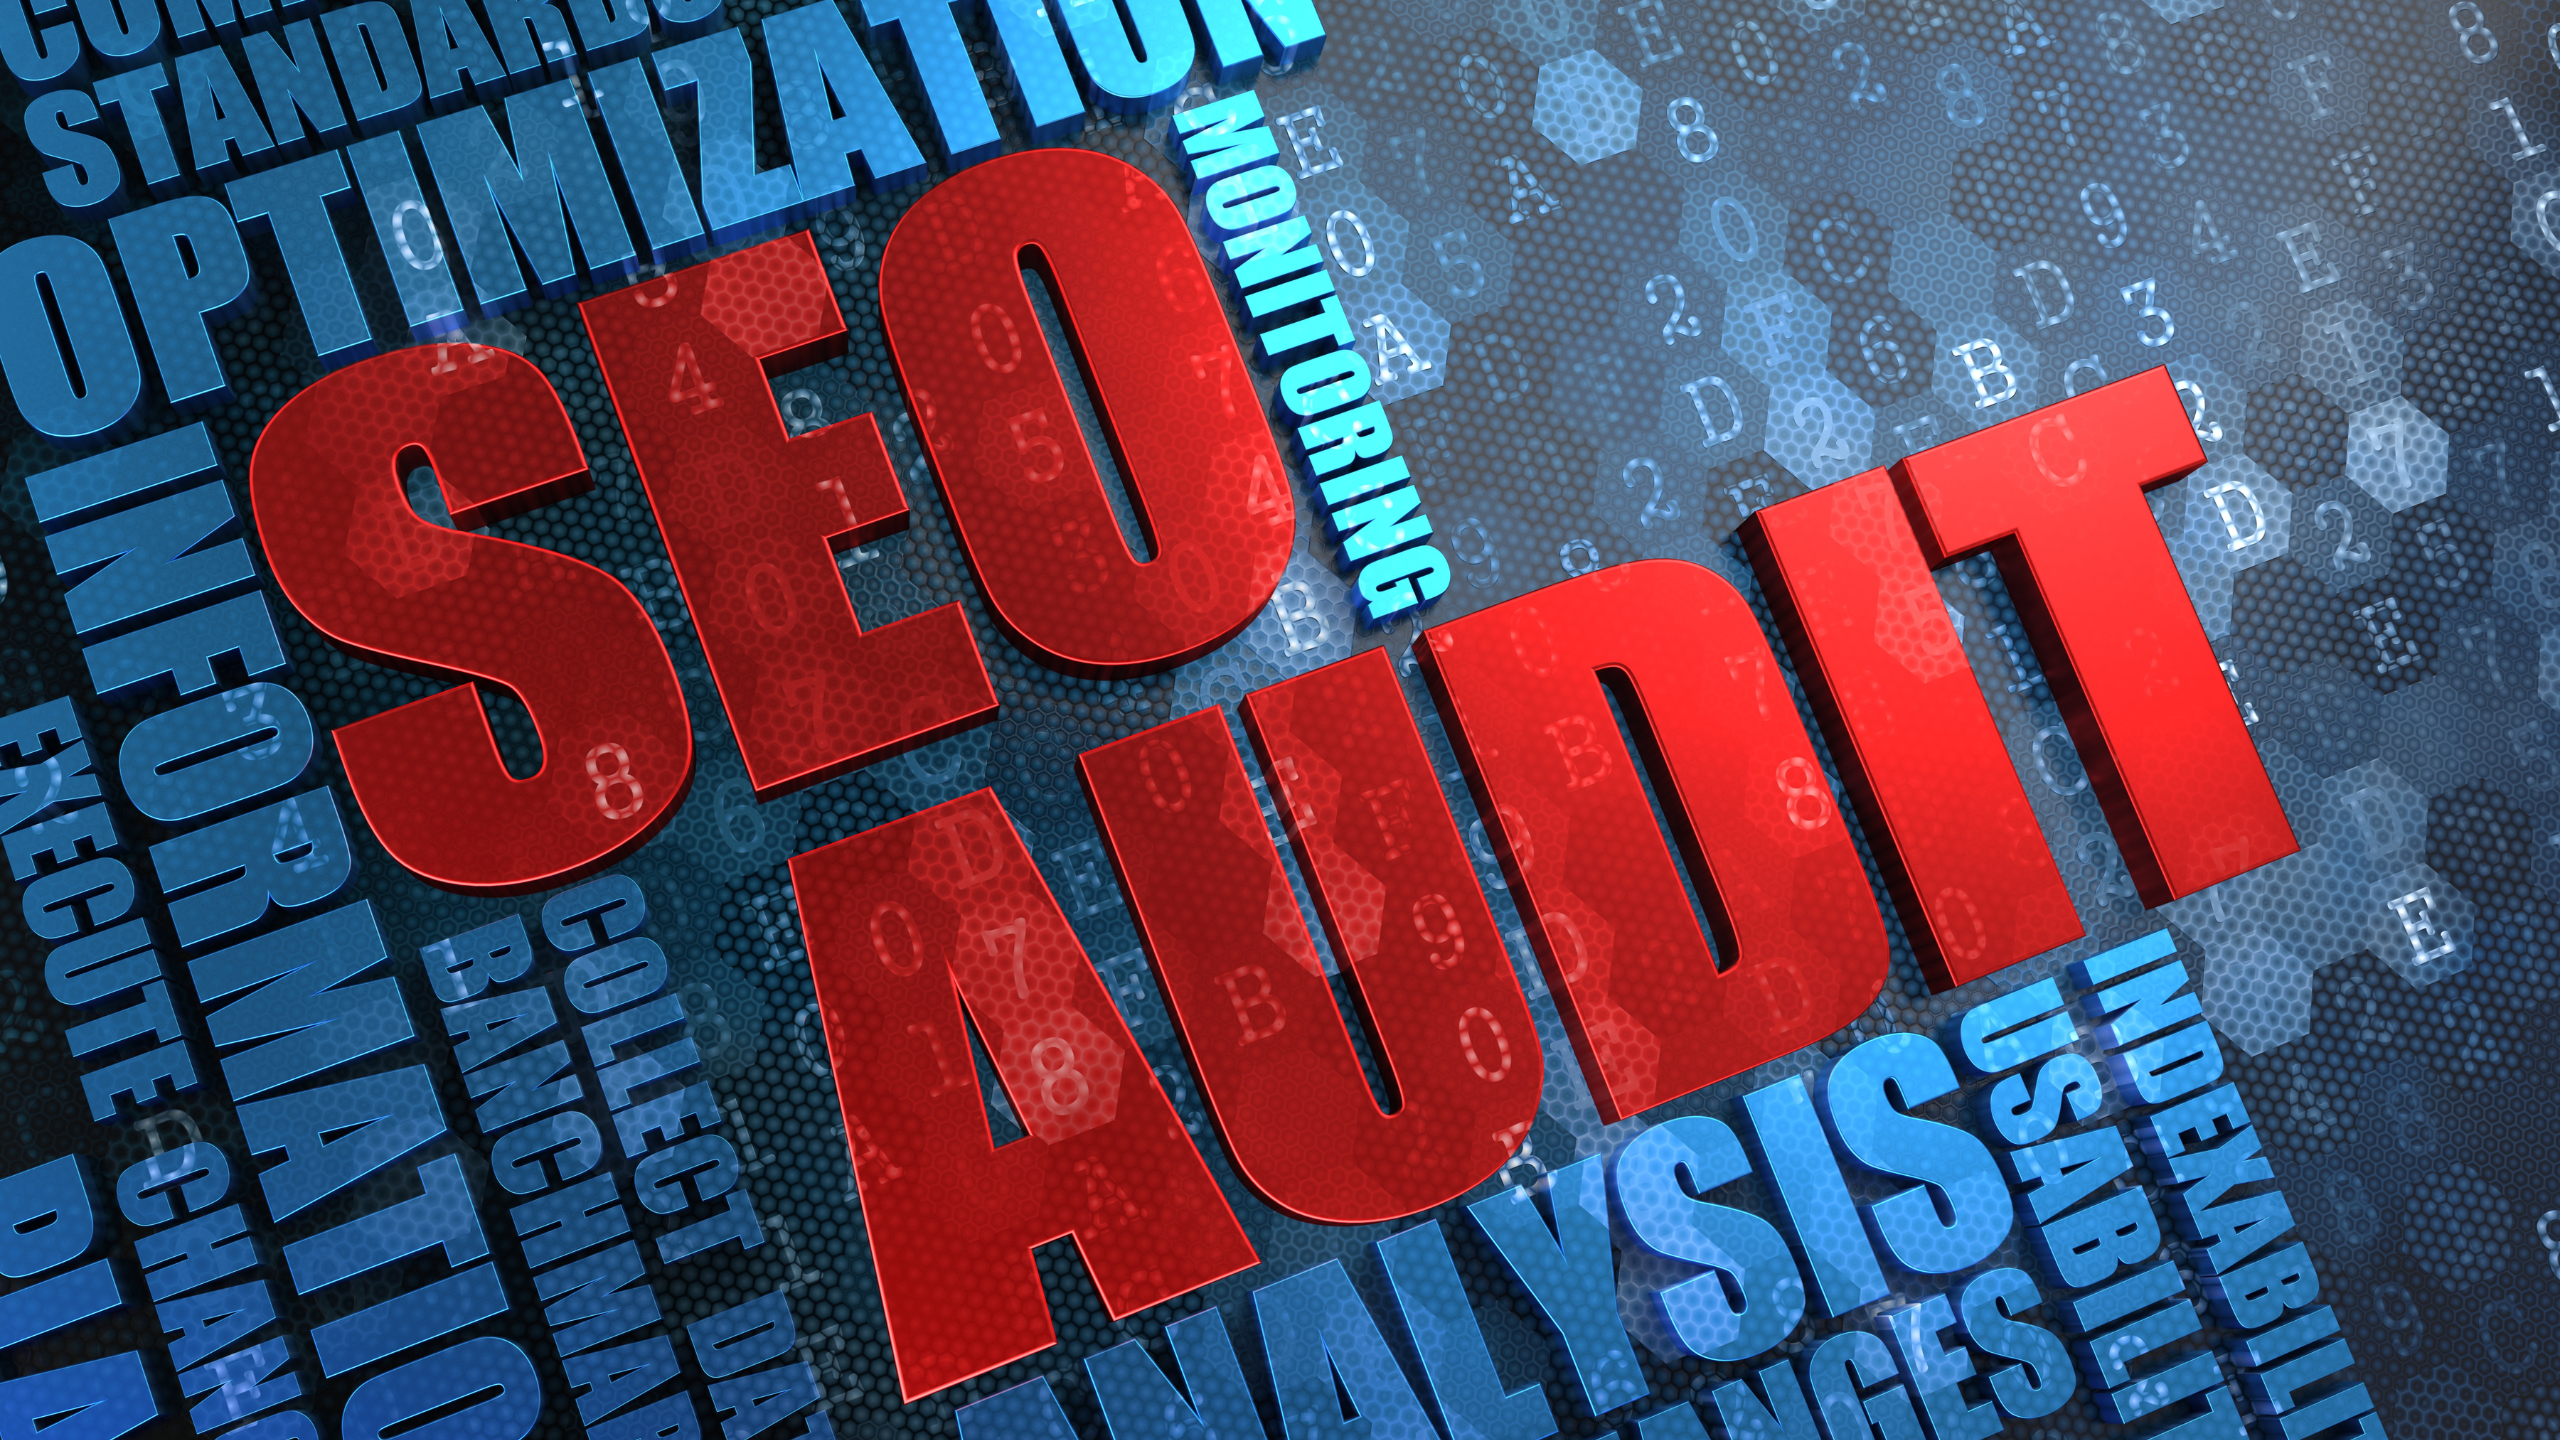 You don't have to have a huge website to do an SEO audit. Every website can benefit from this process.